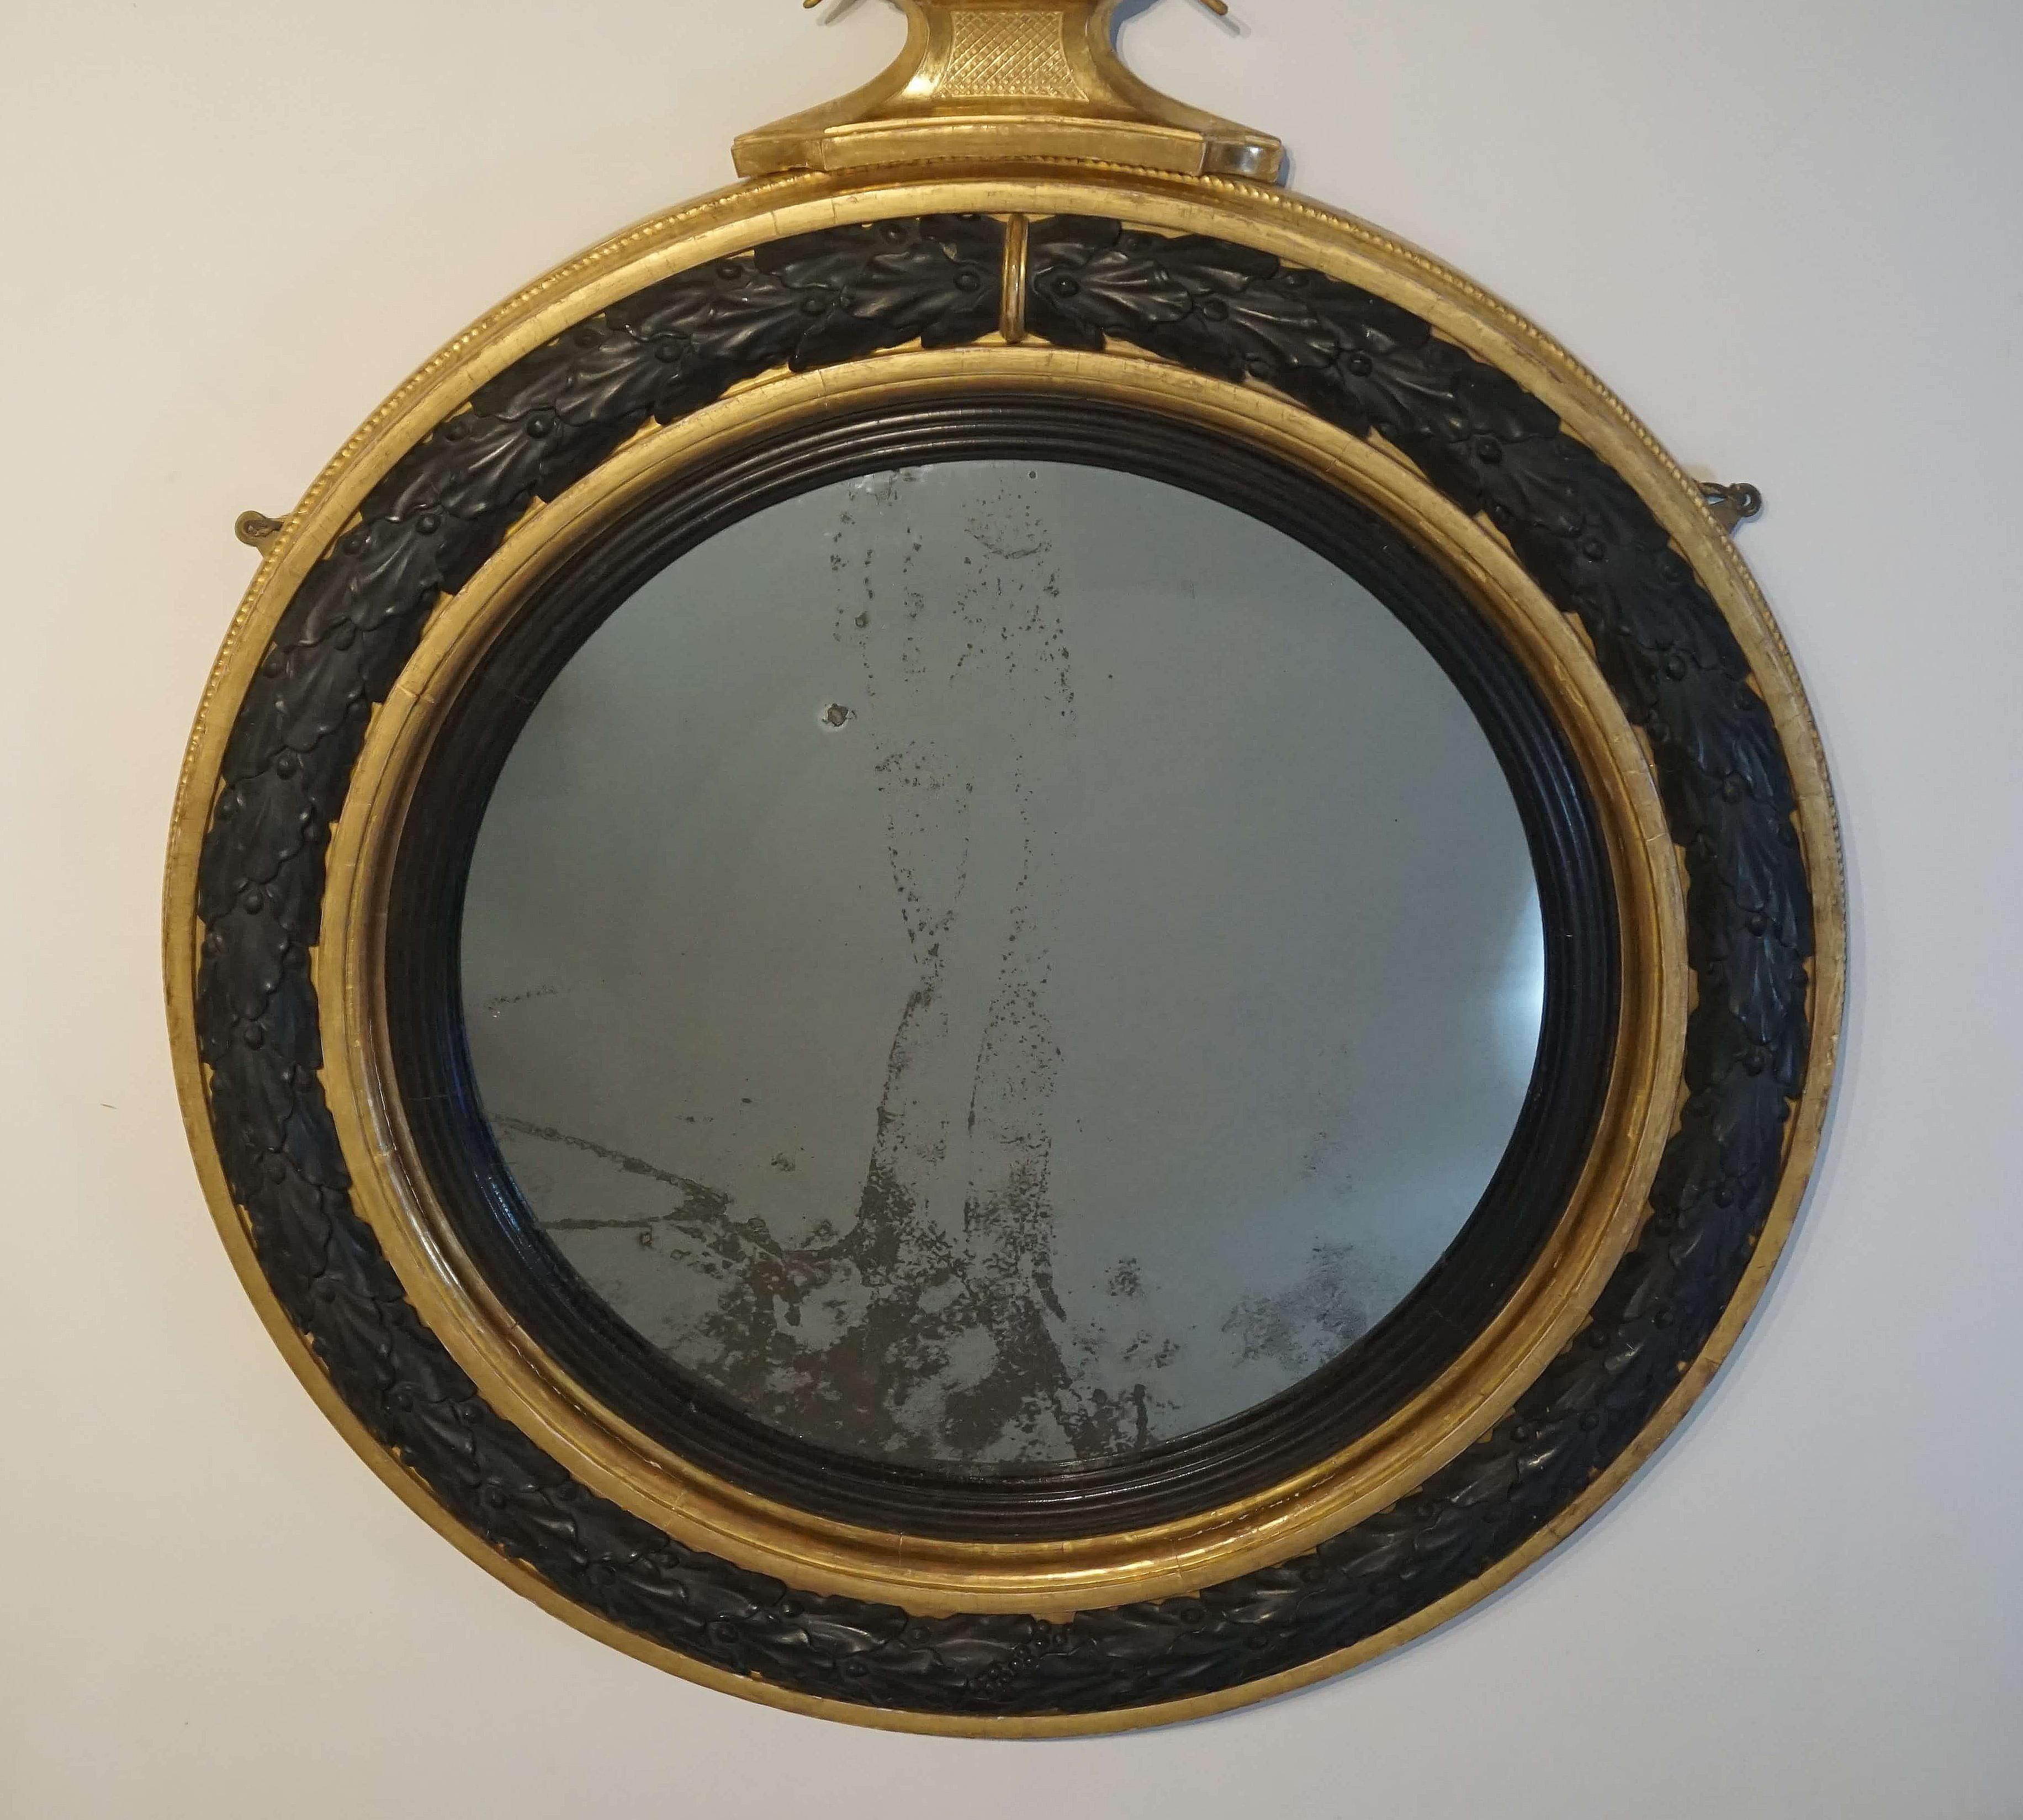 Neoclassical Regency Giltwood and Ebonized Convex Mirror, Signed and Dated 1813 For Sale 10